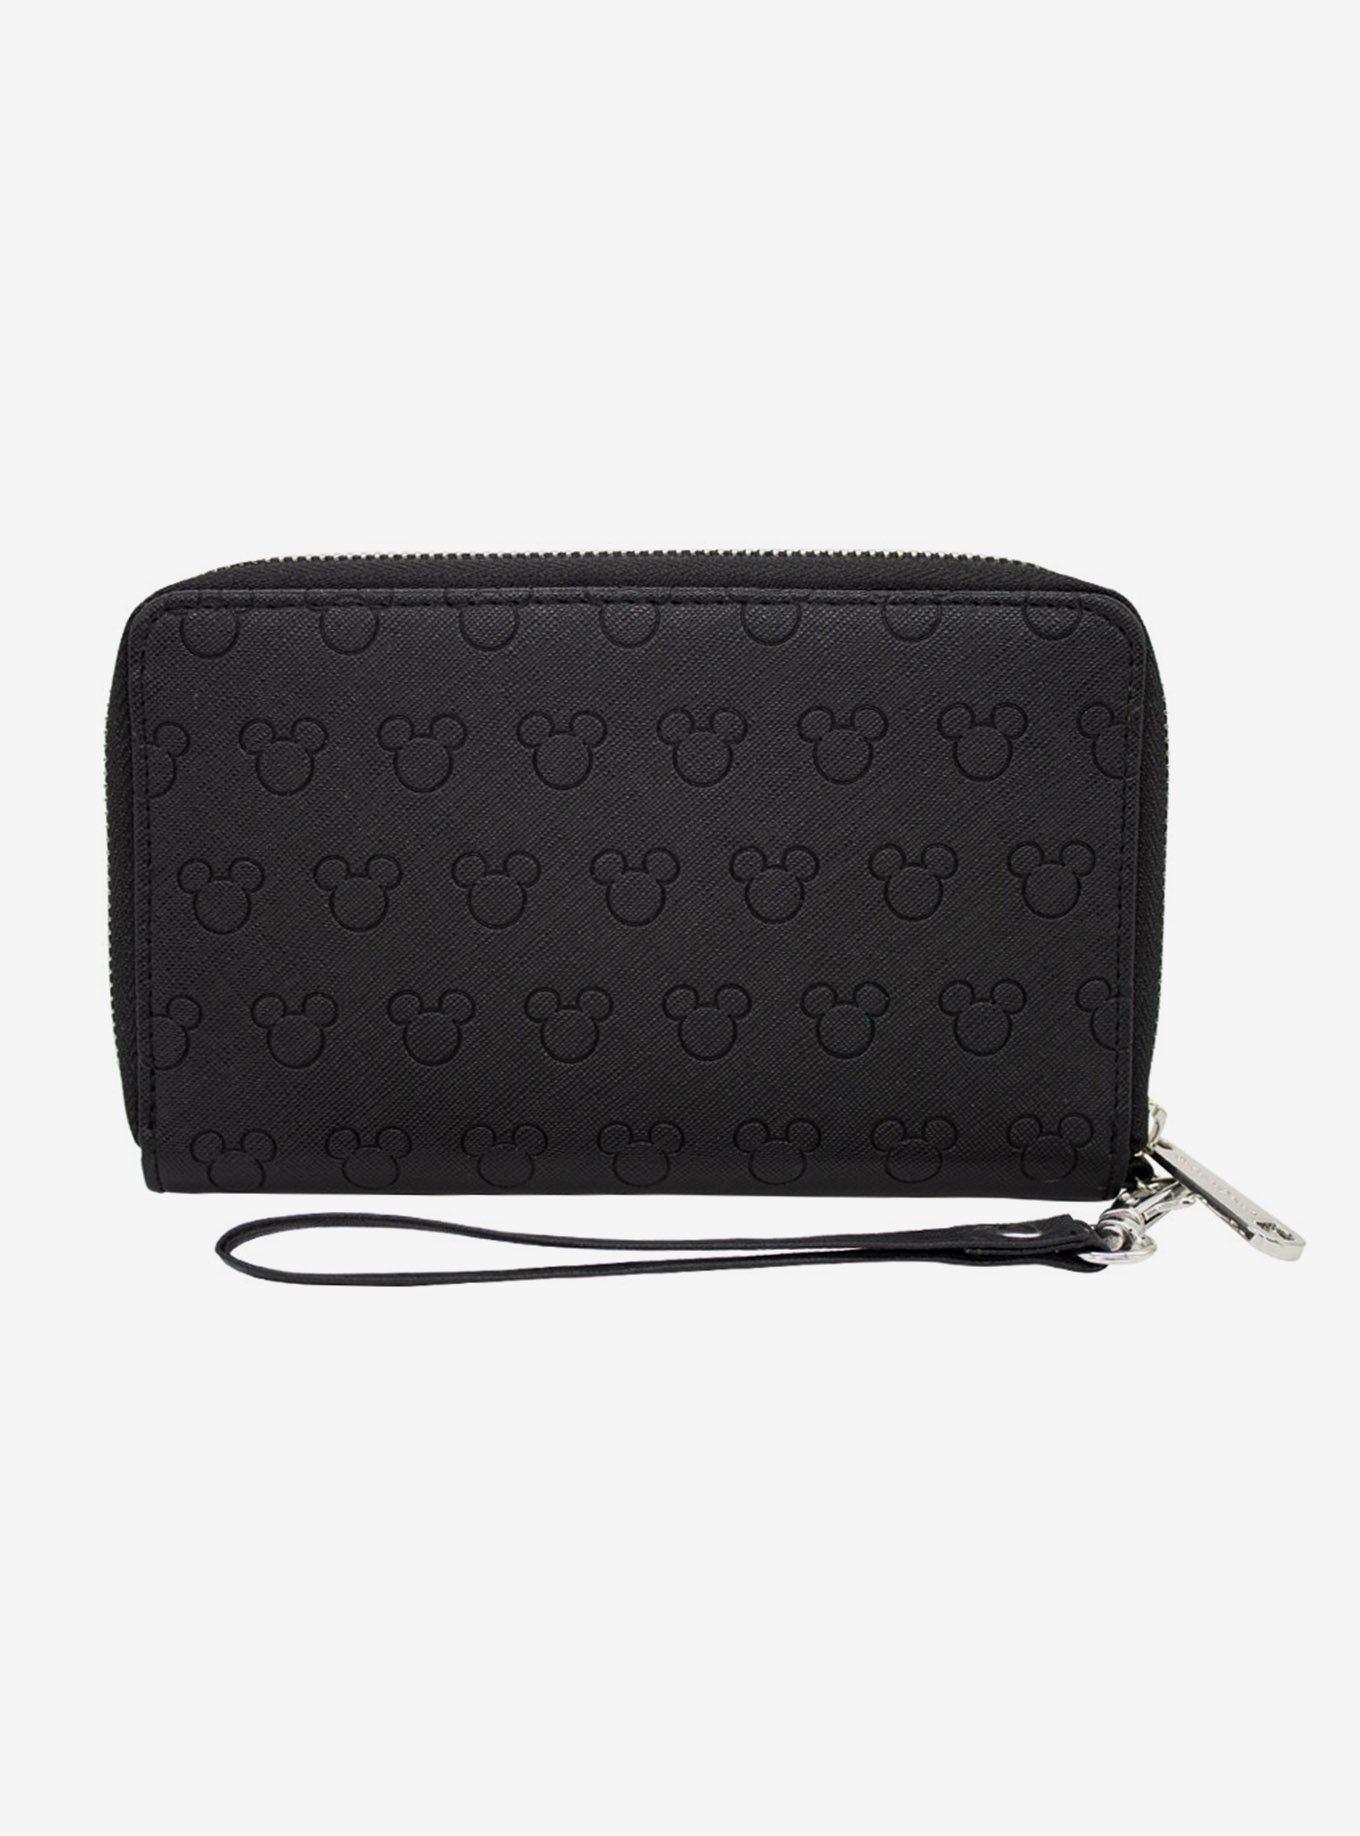 Mickey and Louis Vuitton: the perfect combination of kitch by